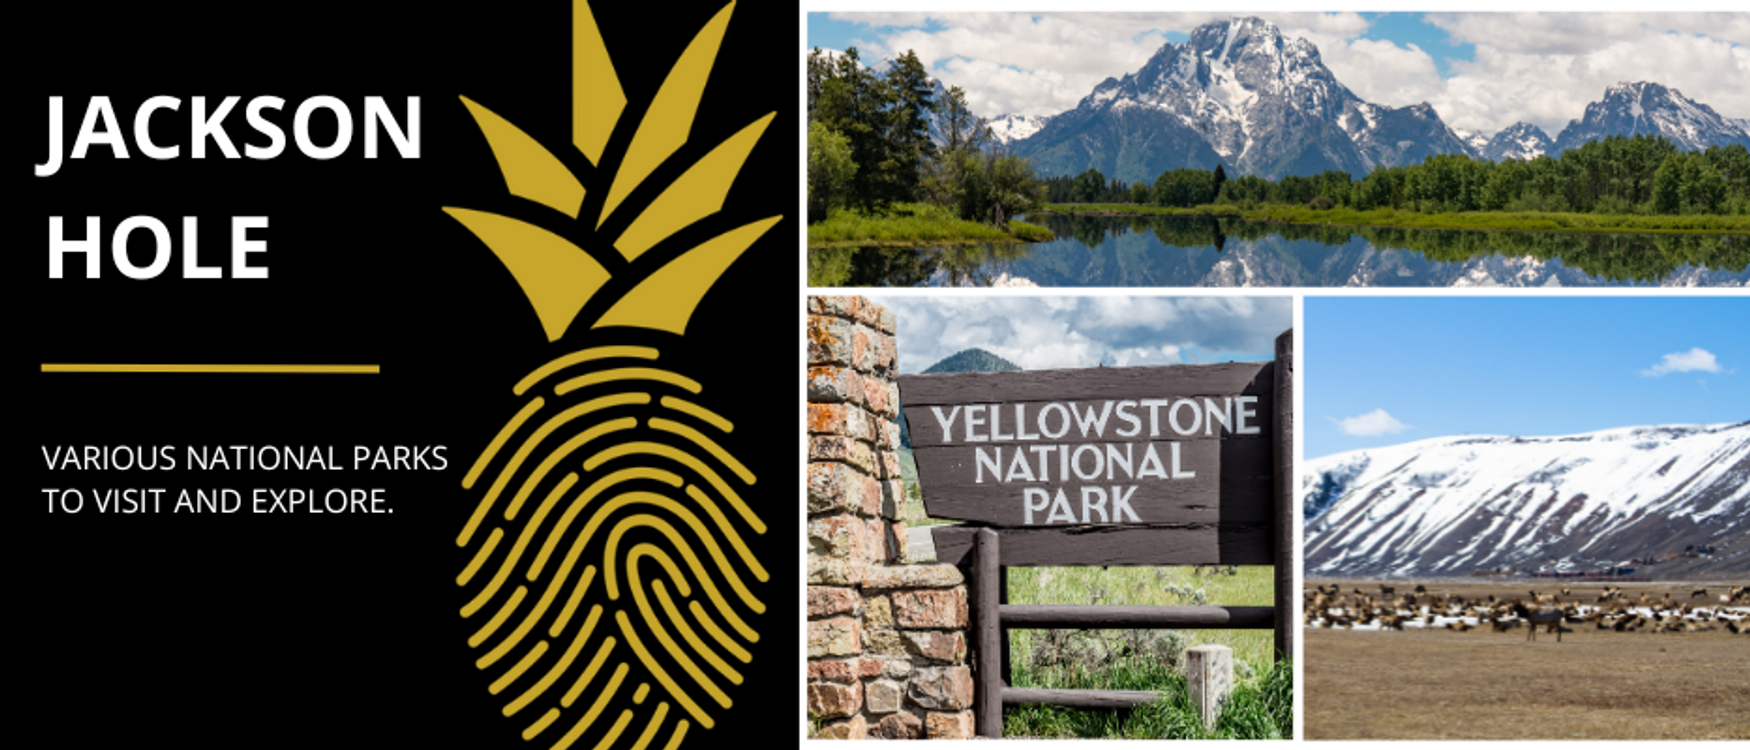 A view of Jackson Hole's natural wonders, including the Grand Teton National Park, Yellowstone National Park, and National Elk Refuge